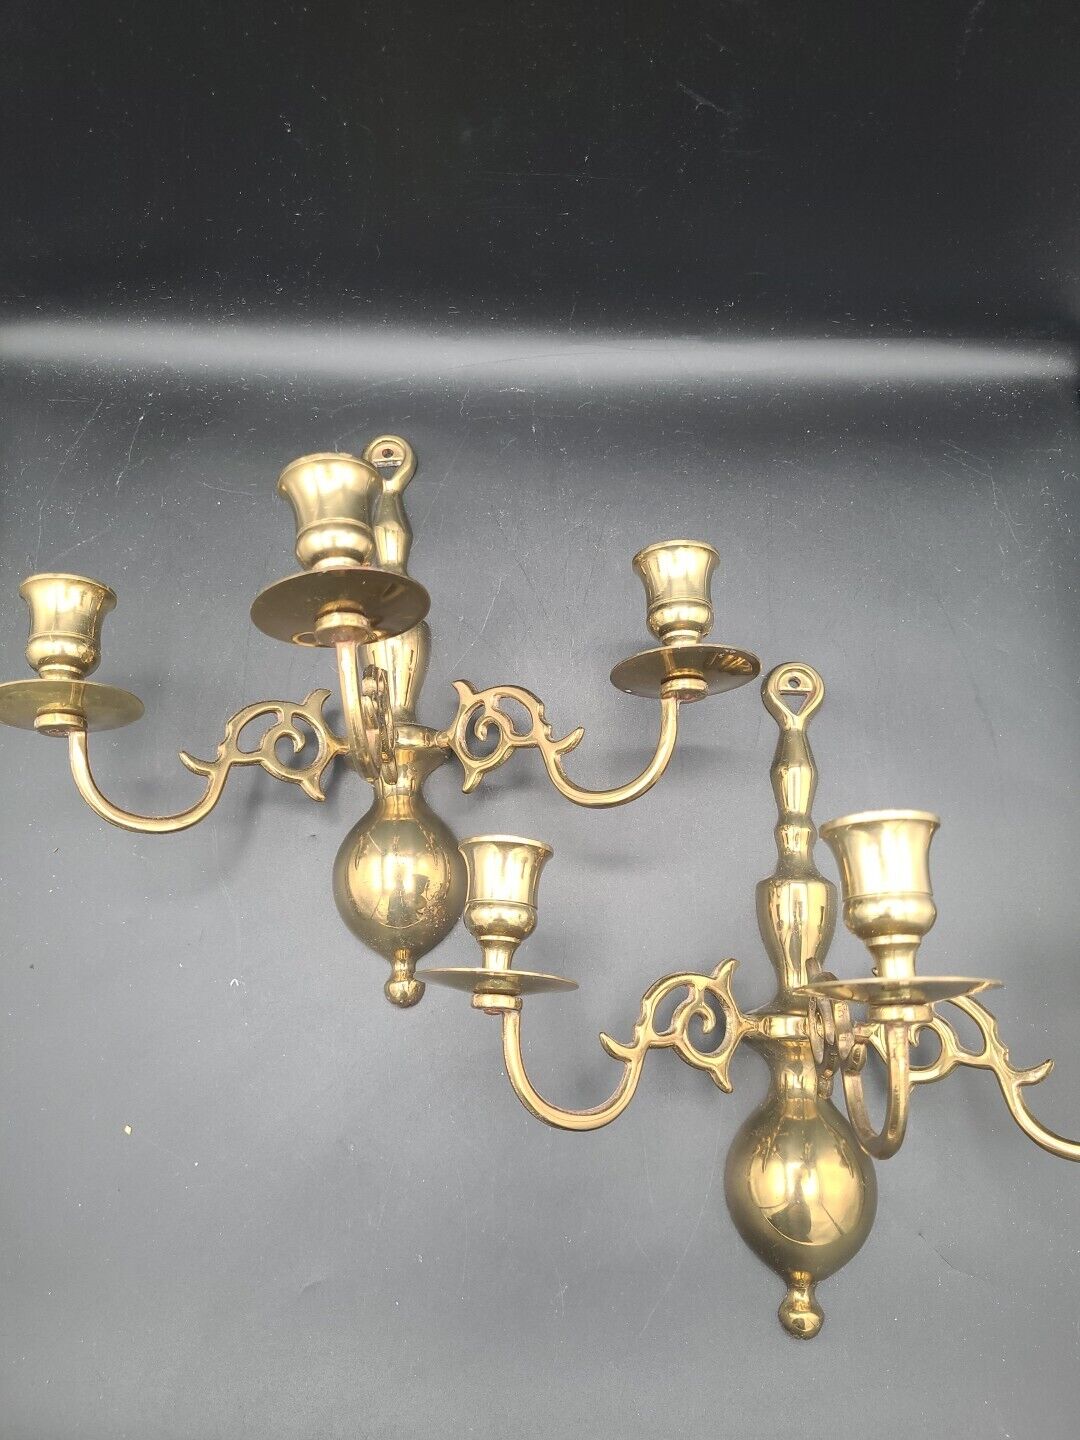 Vintage C M Solid Brass Triple Arm Taper Candle Wall Sconce